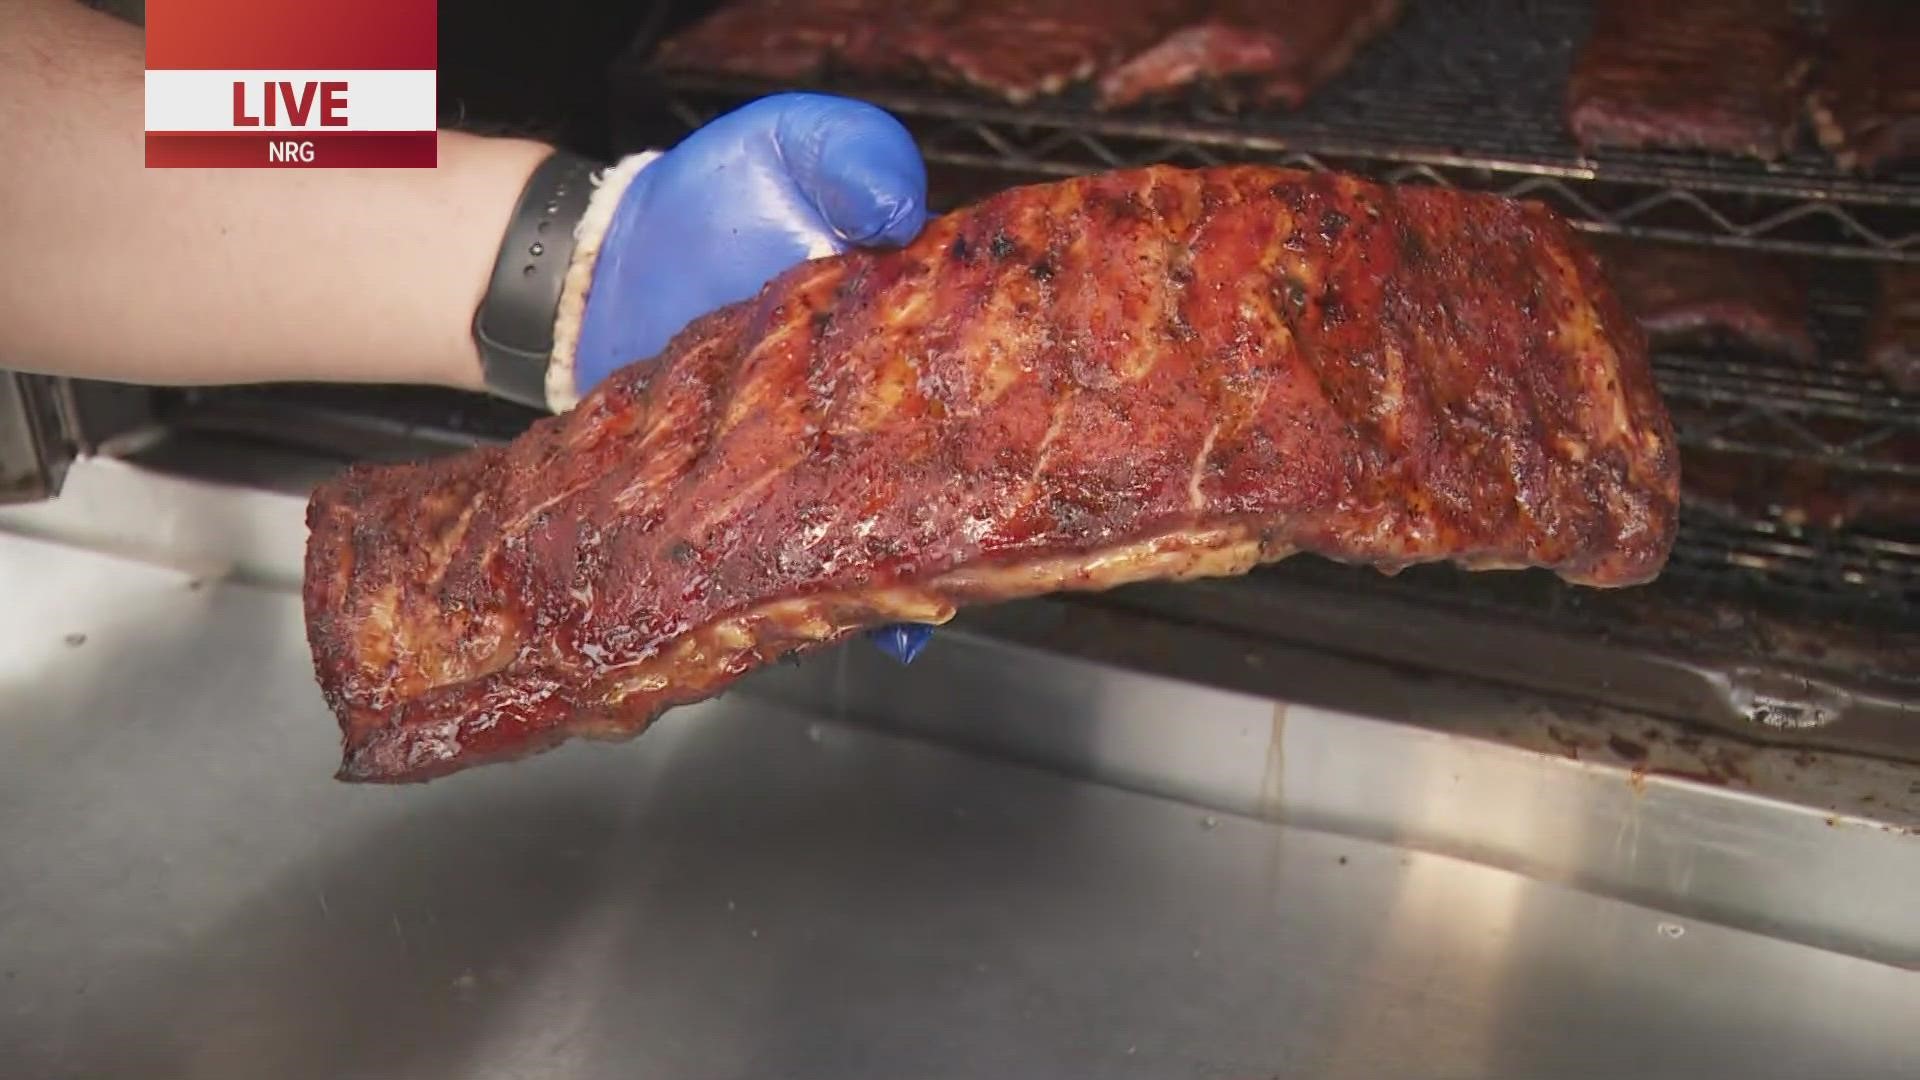 The World's Championship Bar-B-Que Contest at RodeoHouston starts Feb. 23. Teams battle for the best brisket, ribs and chicken.